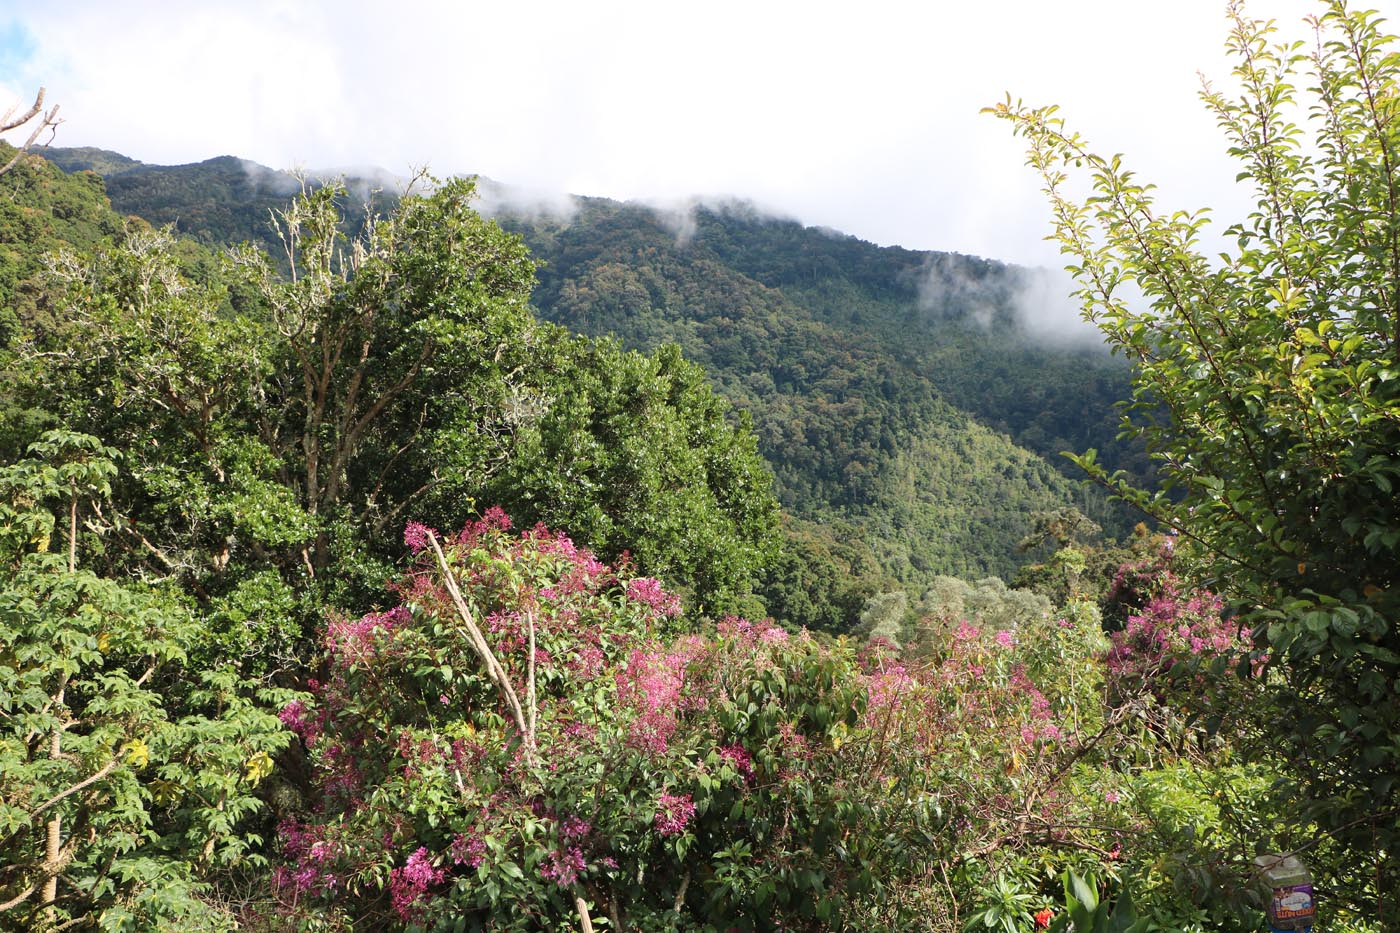 Cloudforest mountains